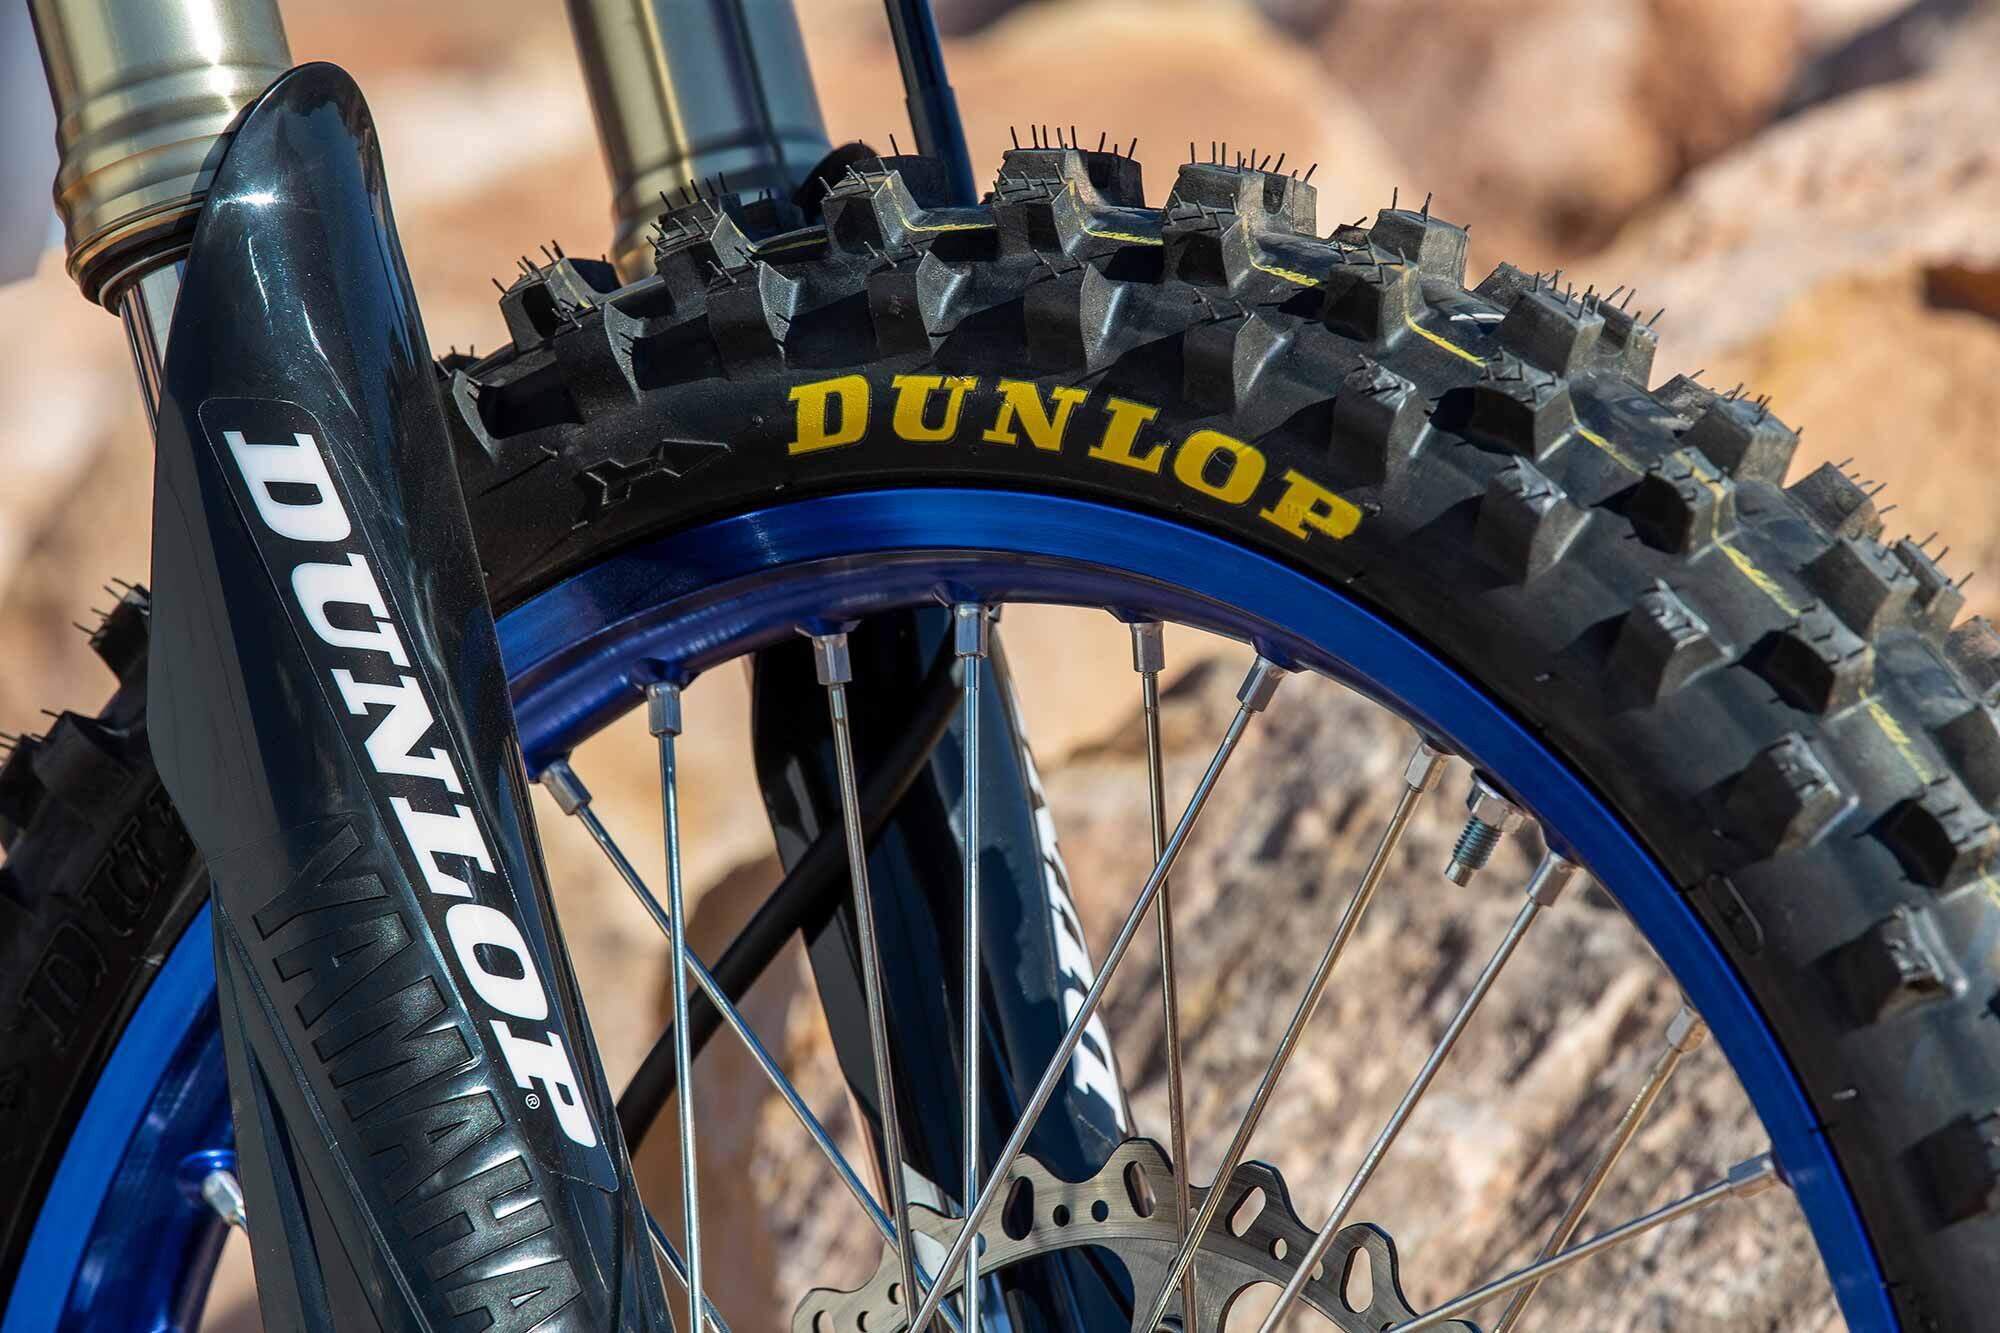 Fresh Dunlop tires on all of the bikes? Check.